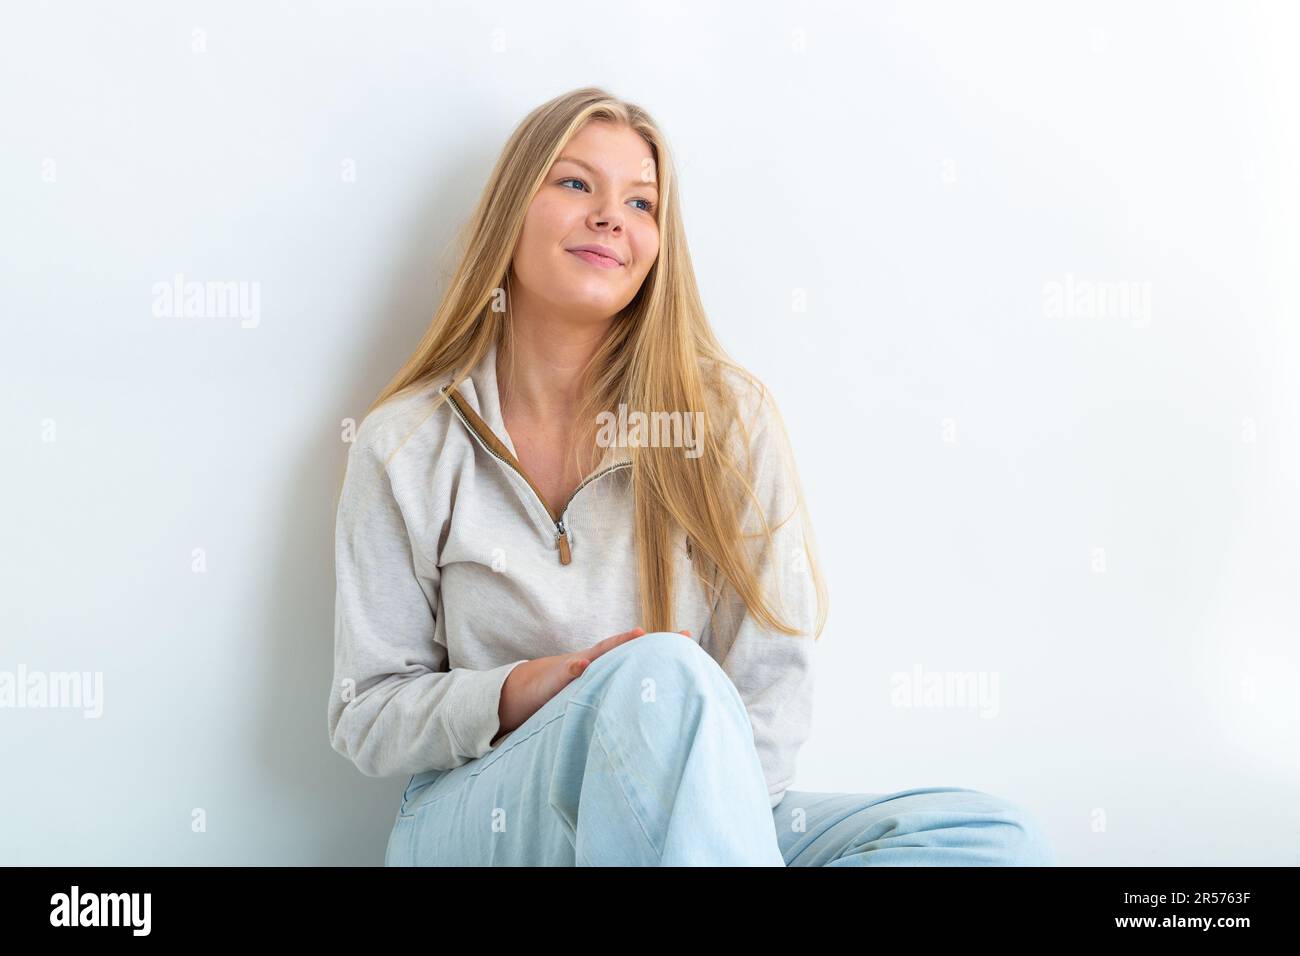 Portrait of a 19 year old blonde woman leaning against a white background looking away Stock Photo